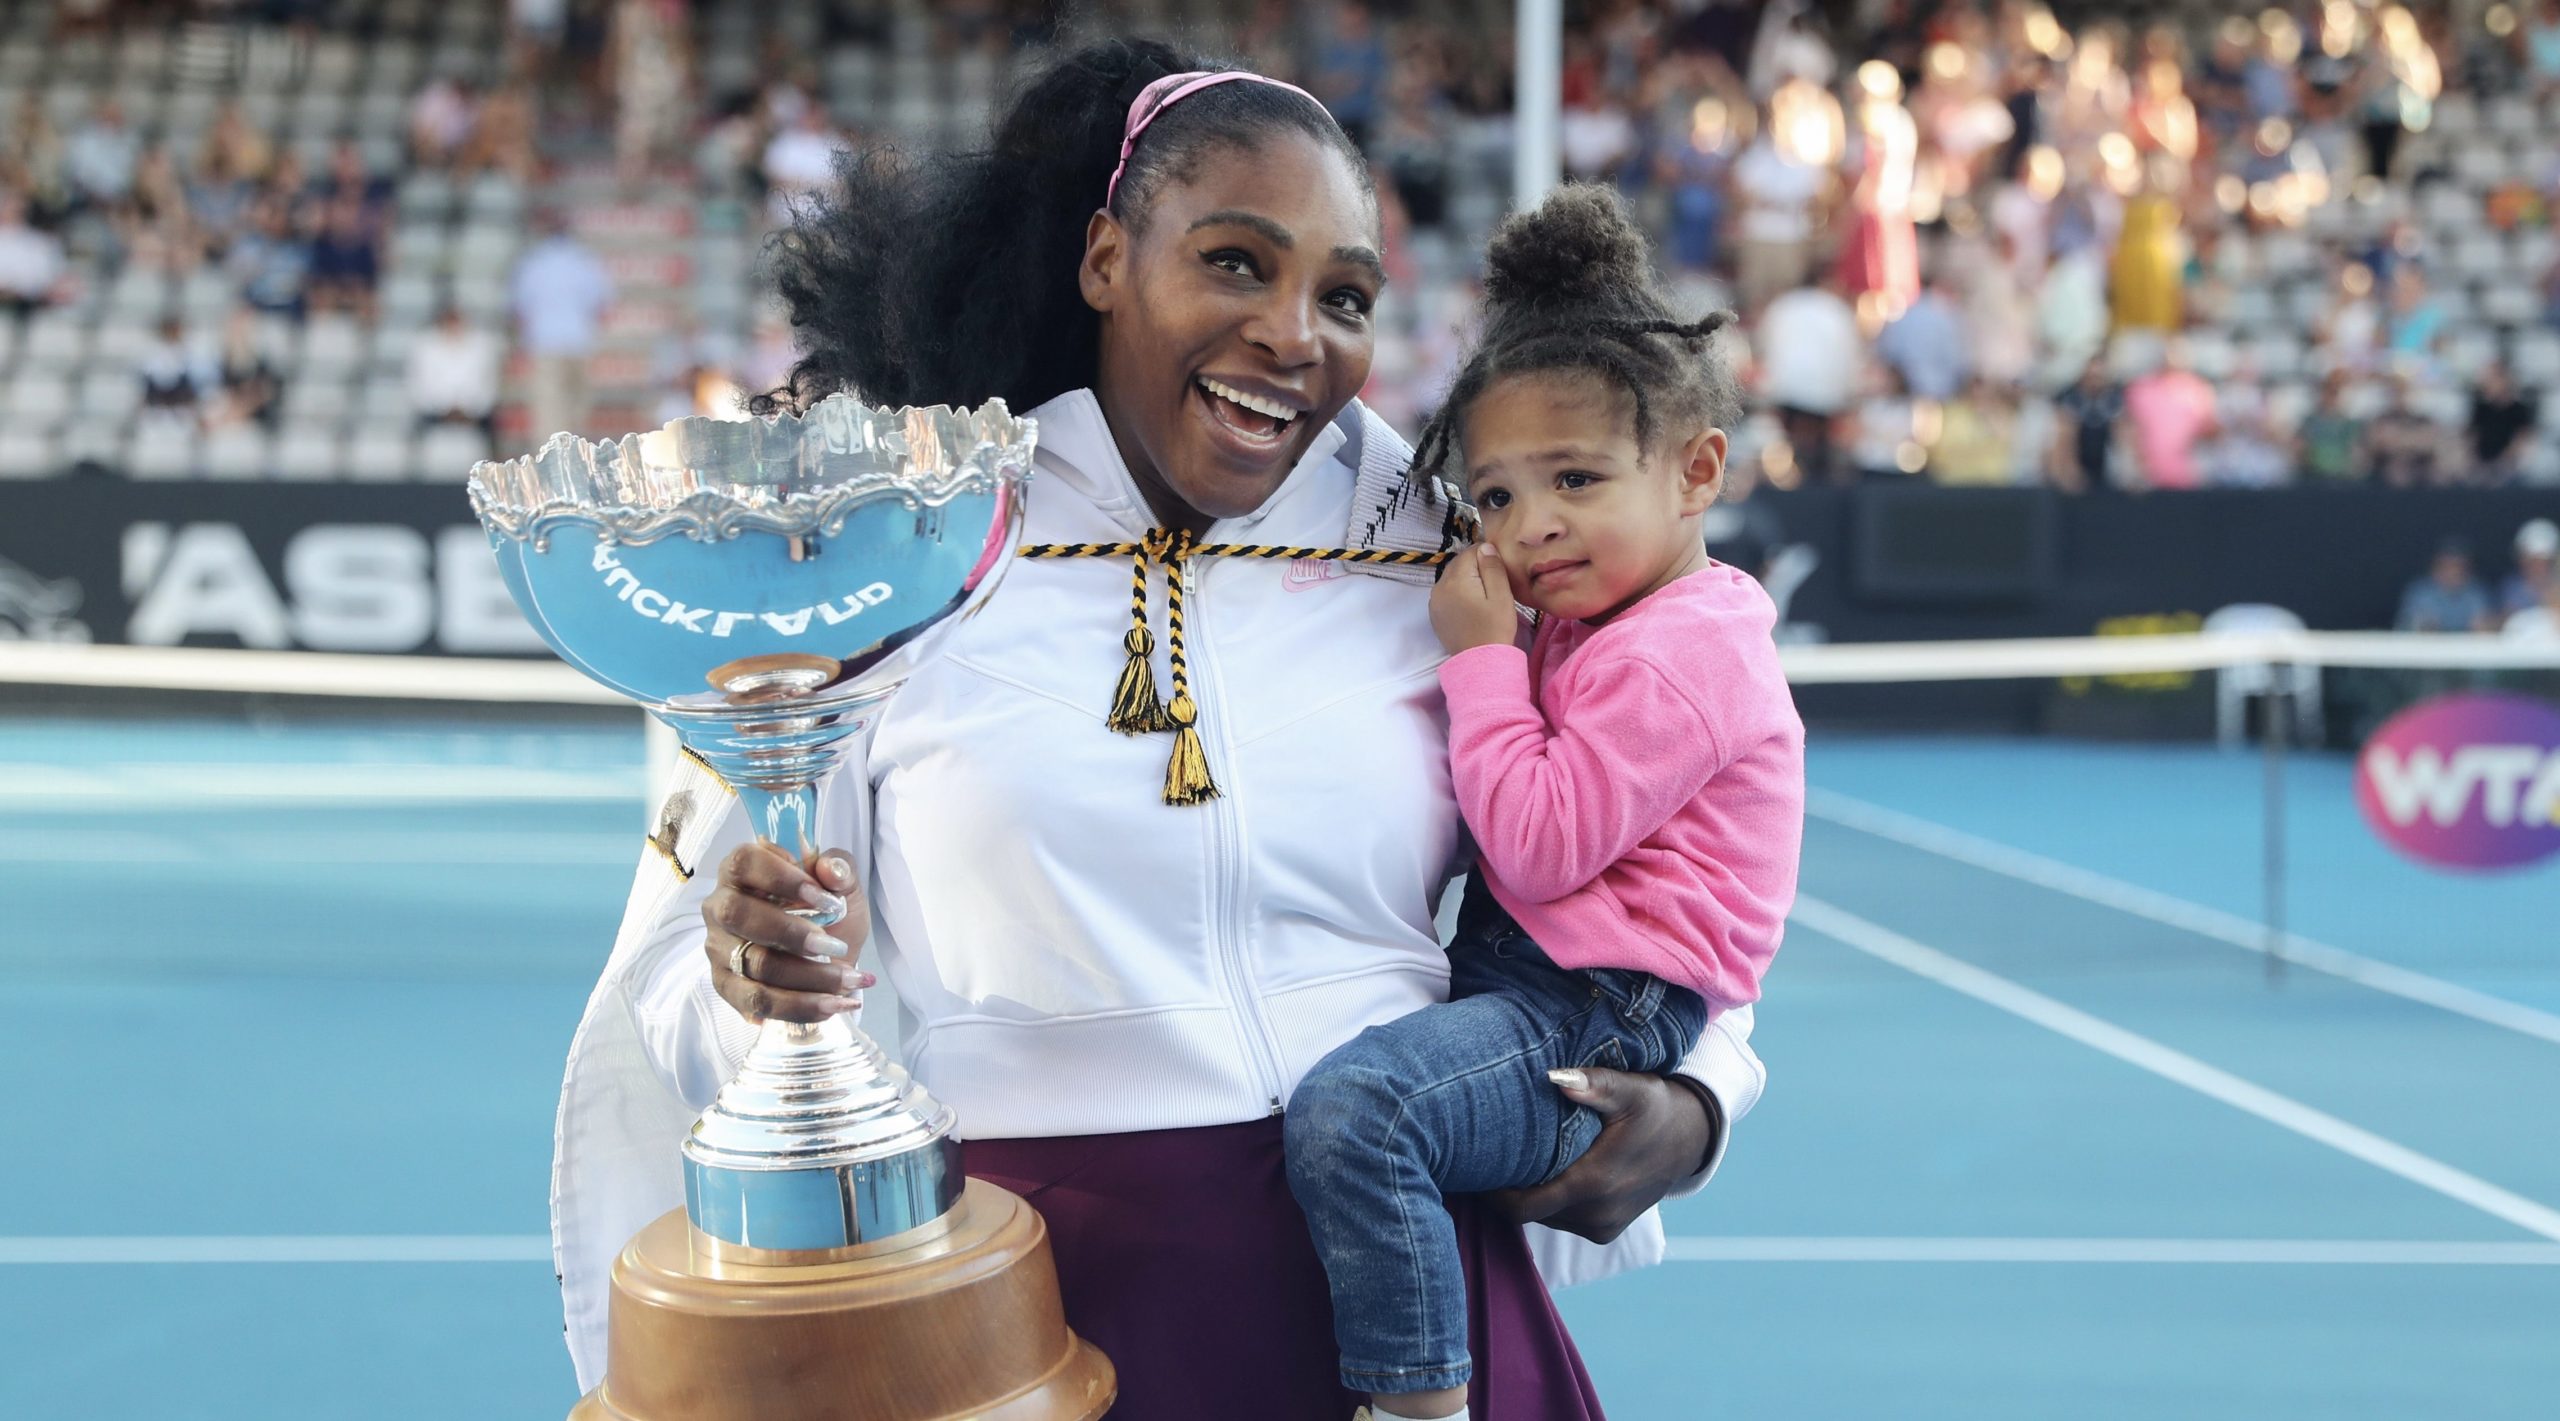 Serena Williams Daughter Olympia Calls Out Tennis Stars’ Hairstyle: ‘It’s a Wig’!